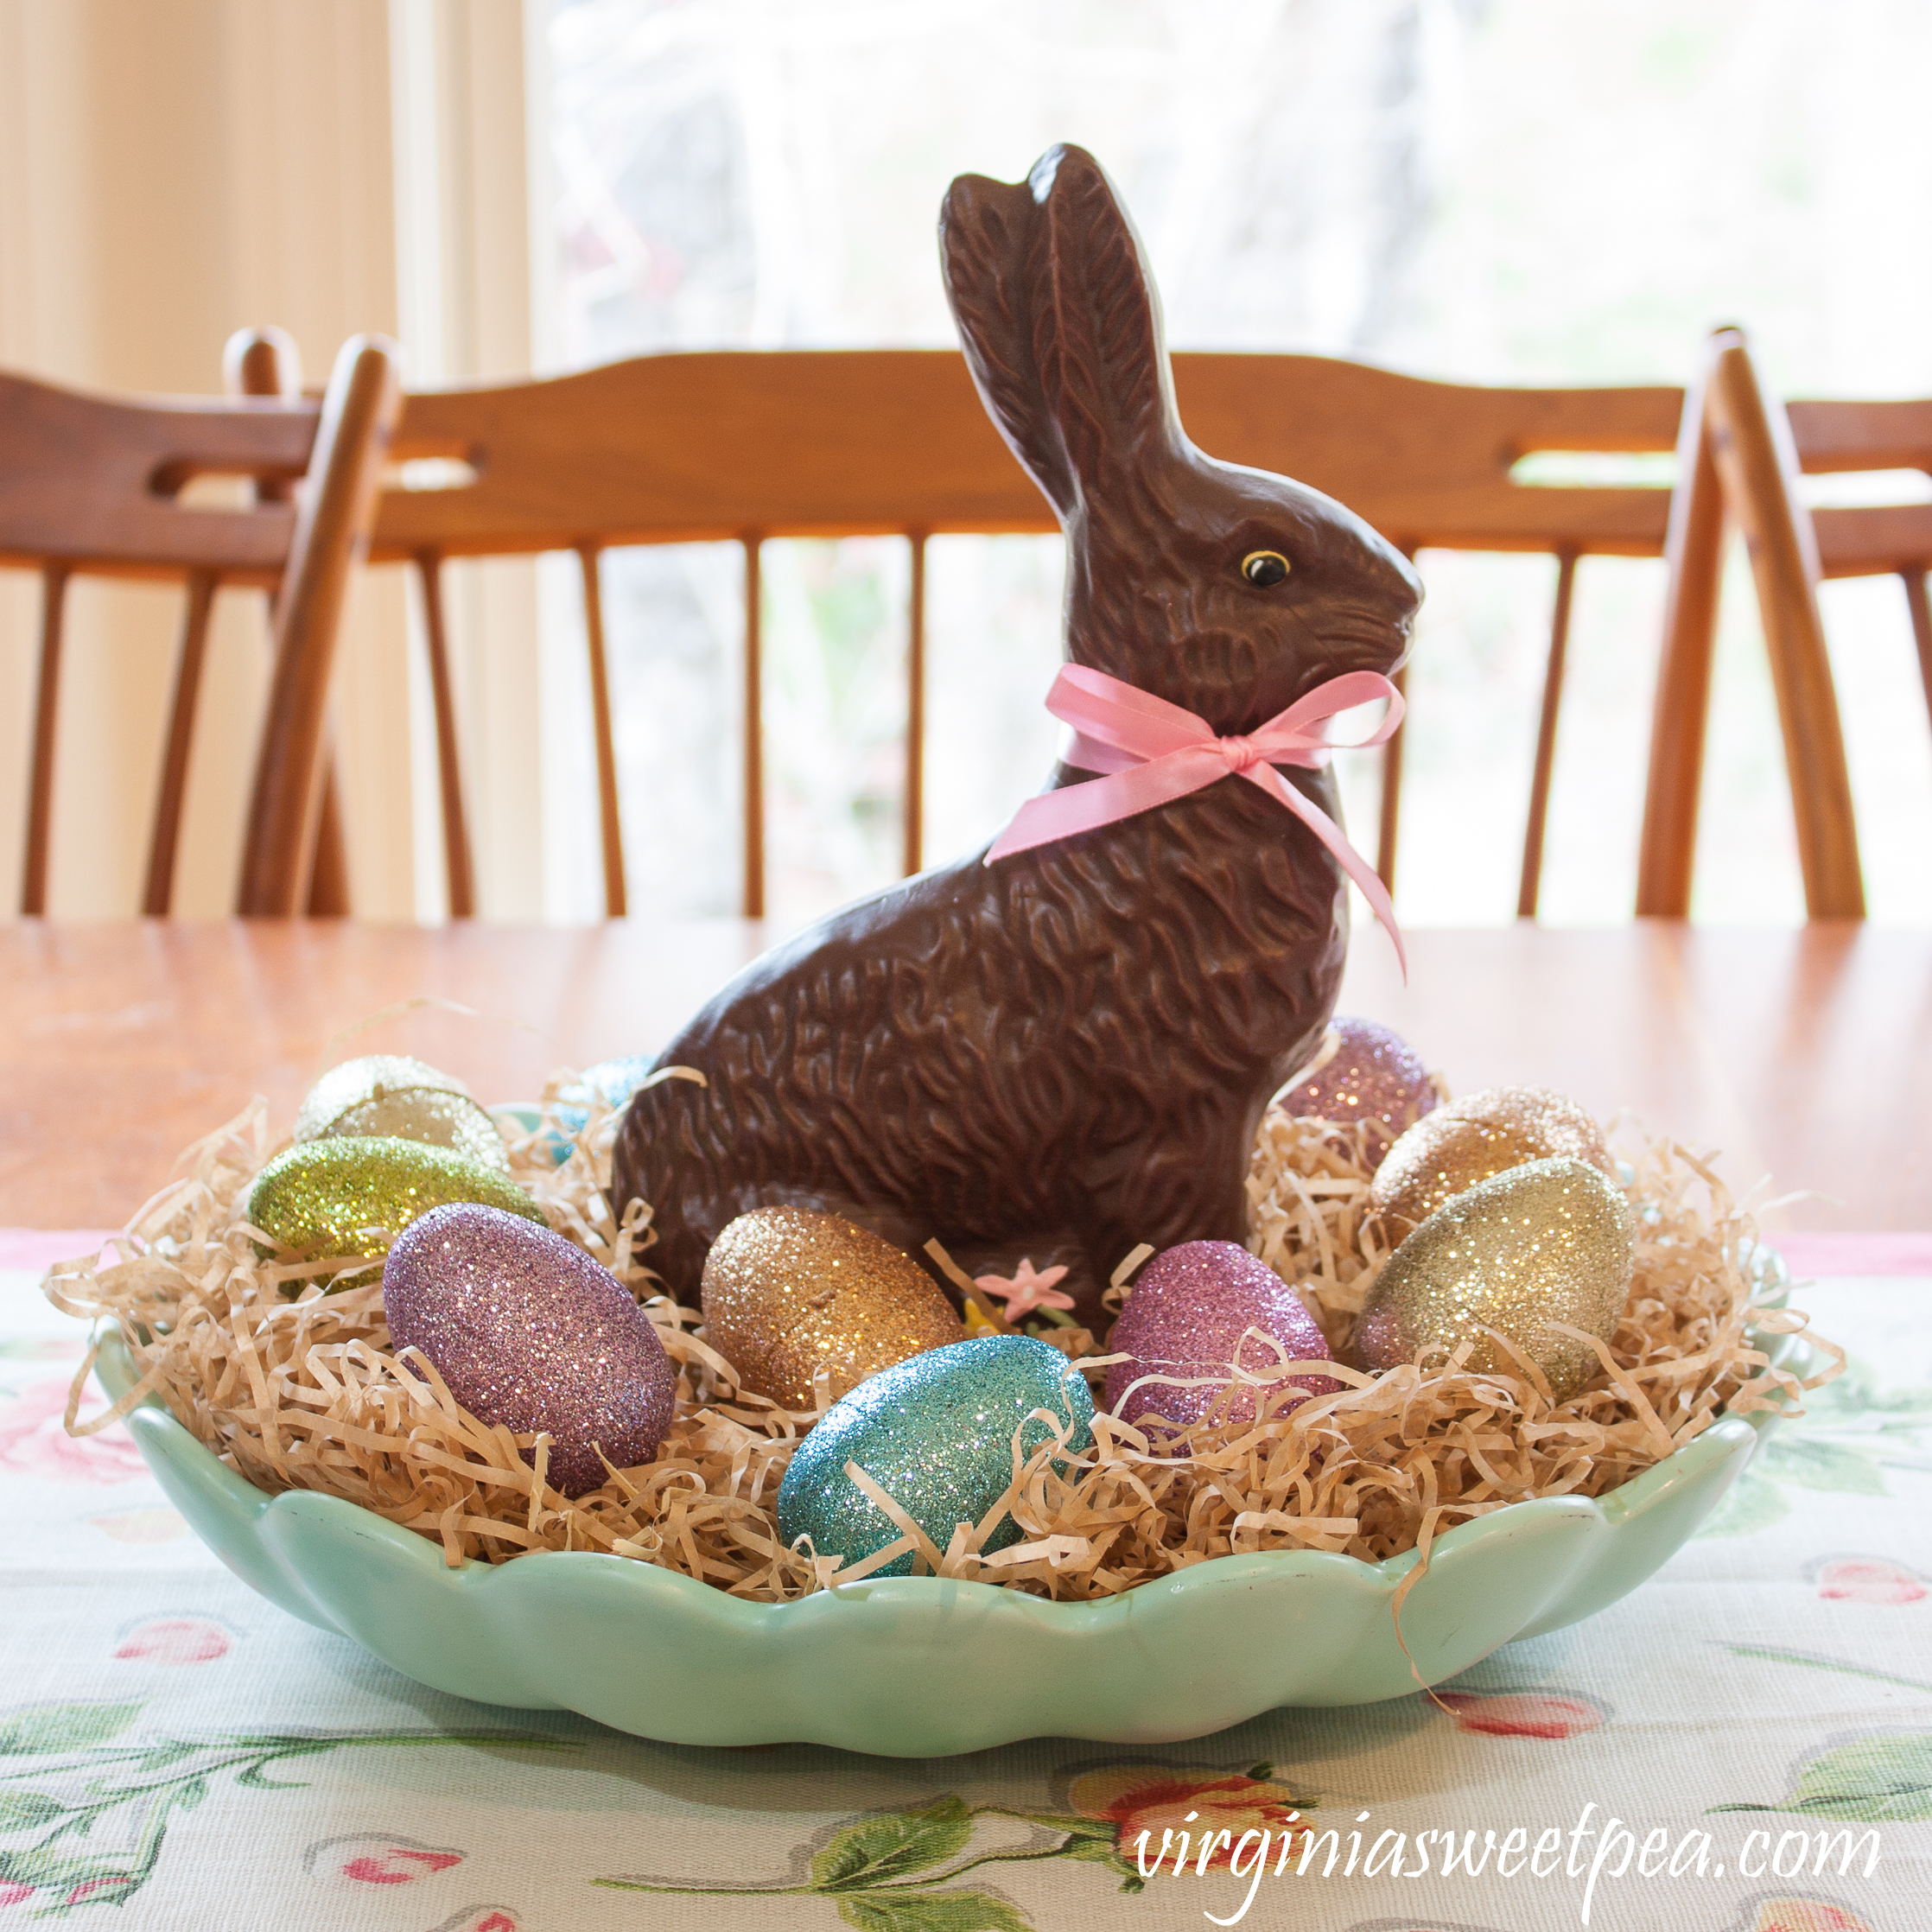 Easter Centerpiece - Faux chocolate rabbit in a vintage robin's egg blue bowl with paper shreds and glittered eggs